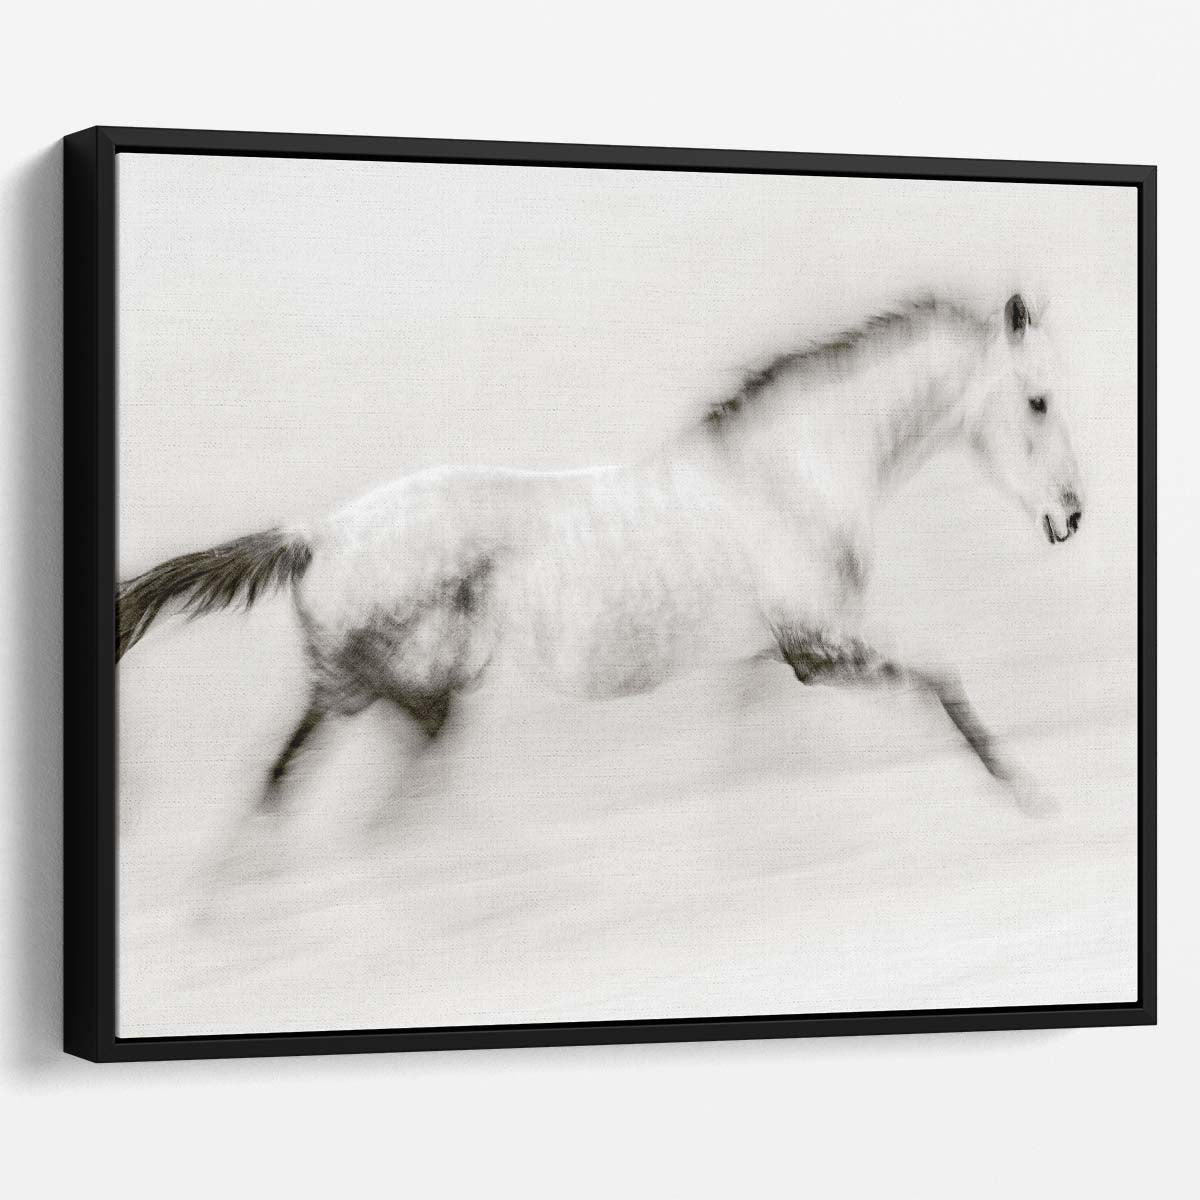 Camargue Stallion in Motion Abstract Equestrian Wall Art by Luxuriance Designs. Made in USA.